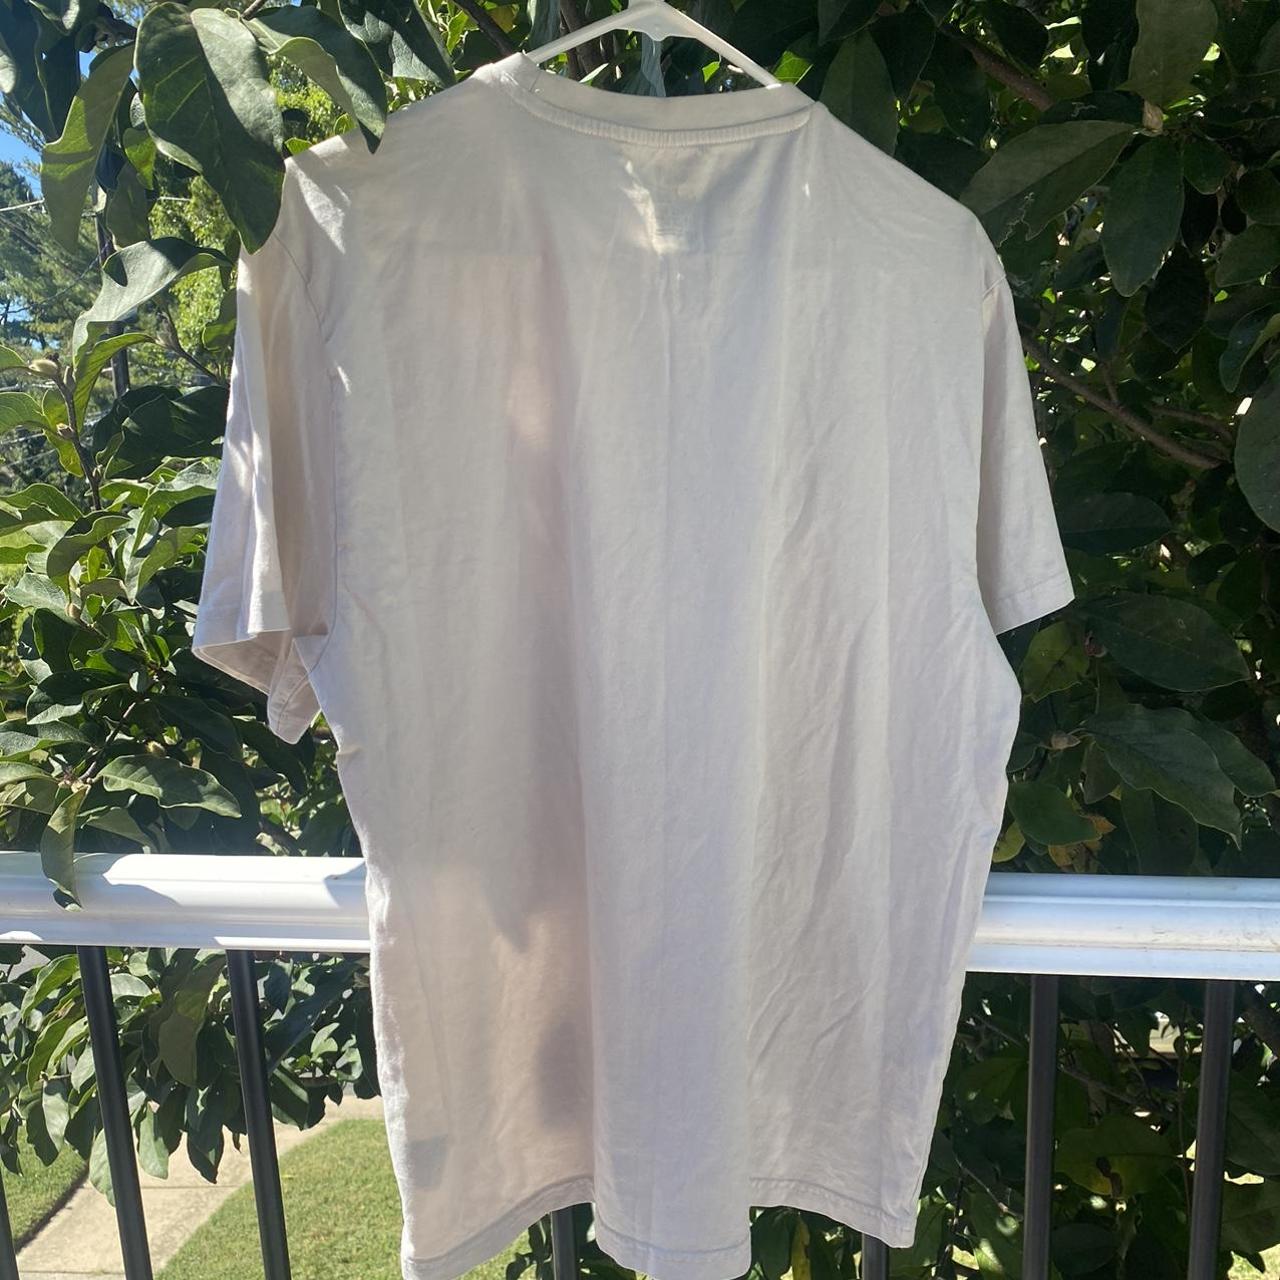 Product Image 2 - Mens off white HM shirt